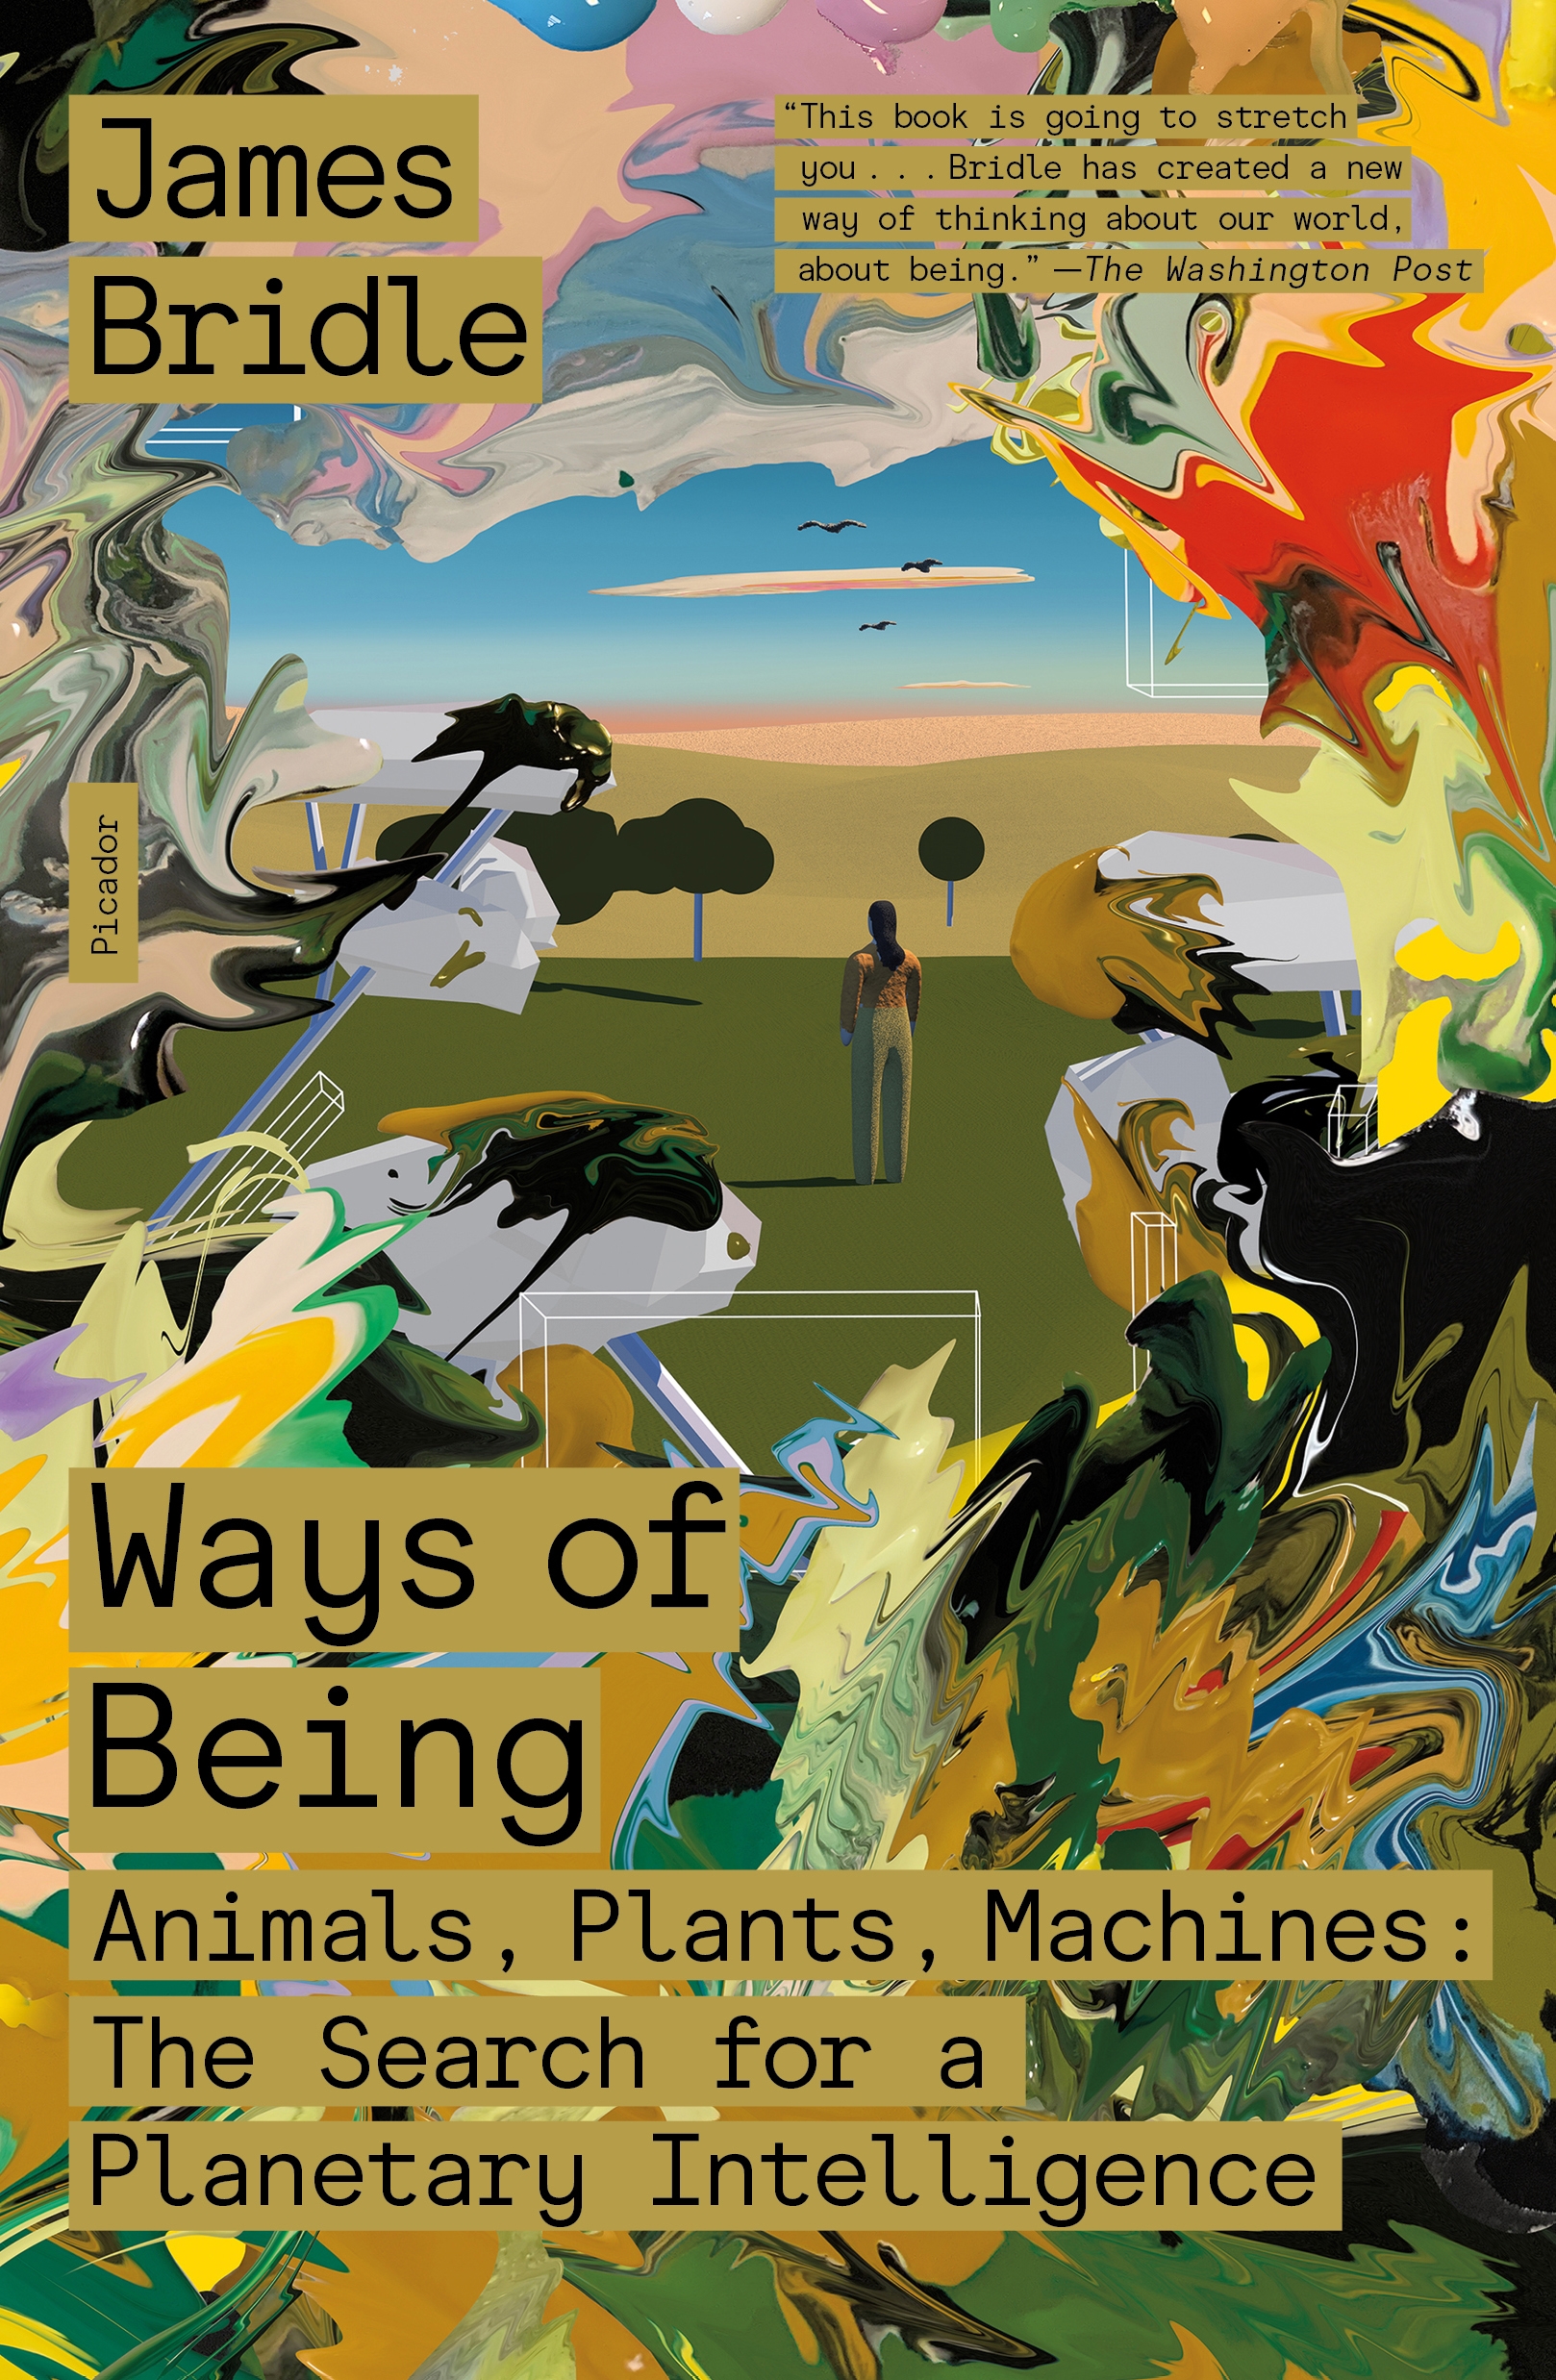 Ways of Being Animals, Plants, Machines: The Search for a Planetary Intelligence